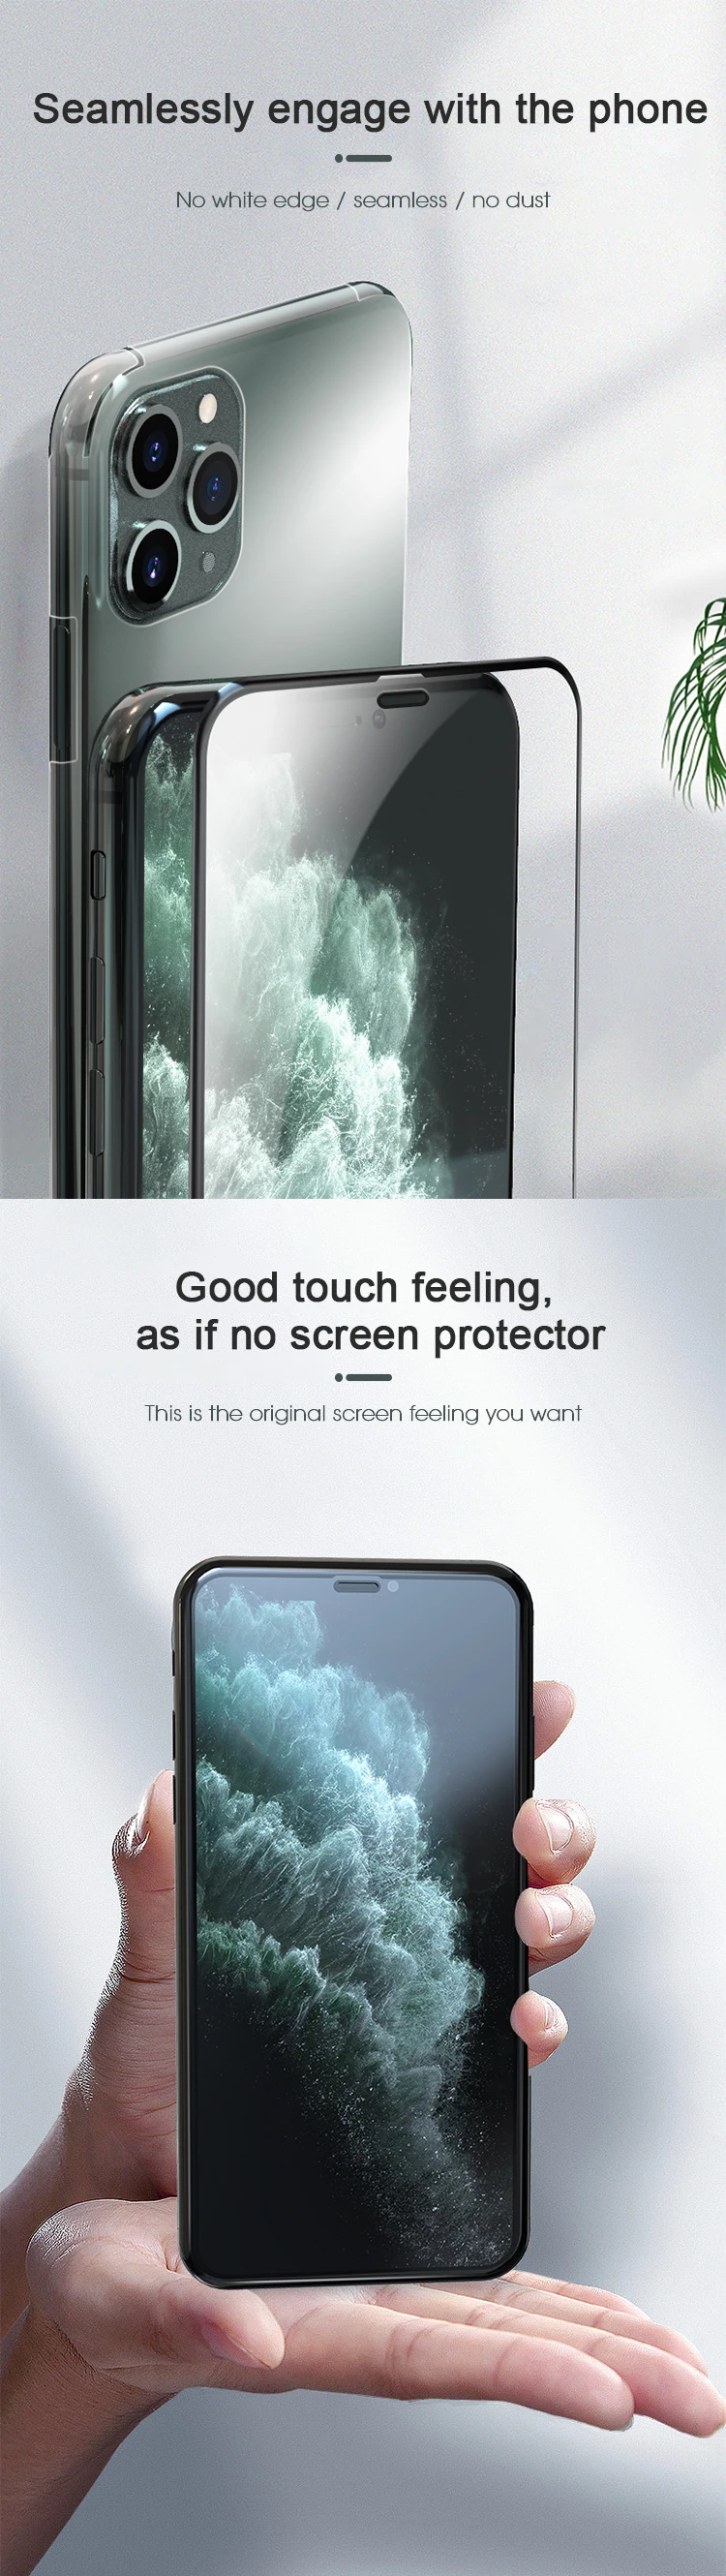 ITOP 2.5D Transparent Clear 9H Tempered Glass Screen Protector for iPhone XR X XS Max 11 Pro Max